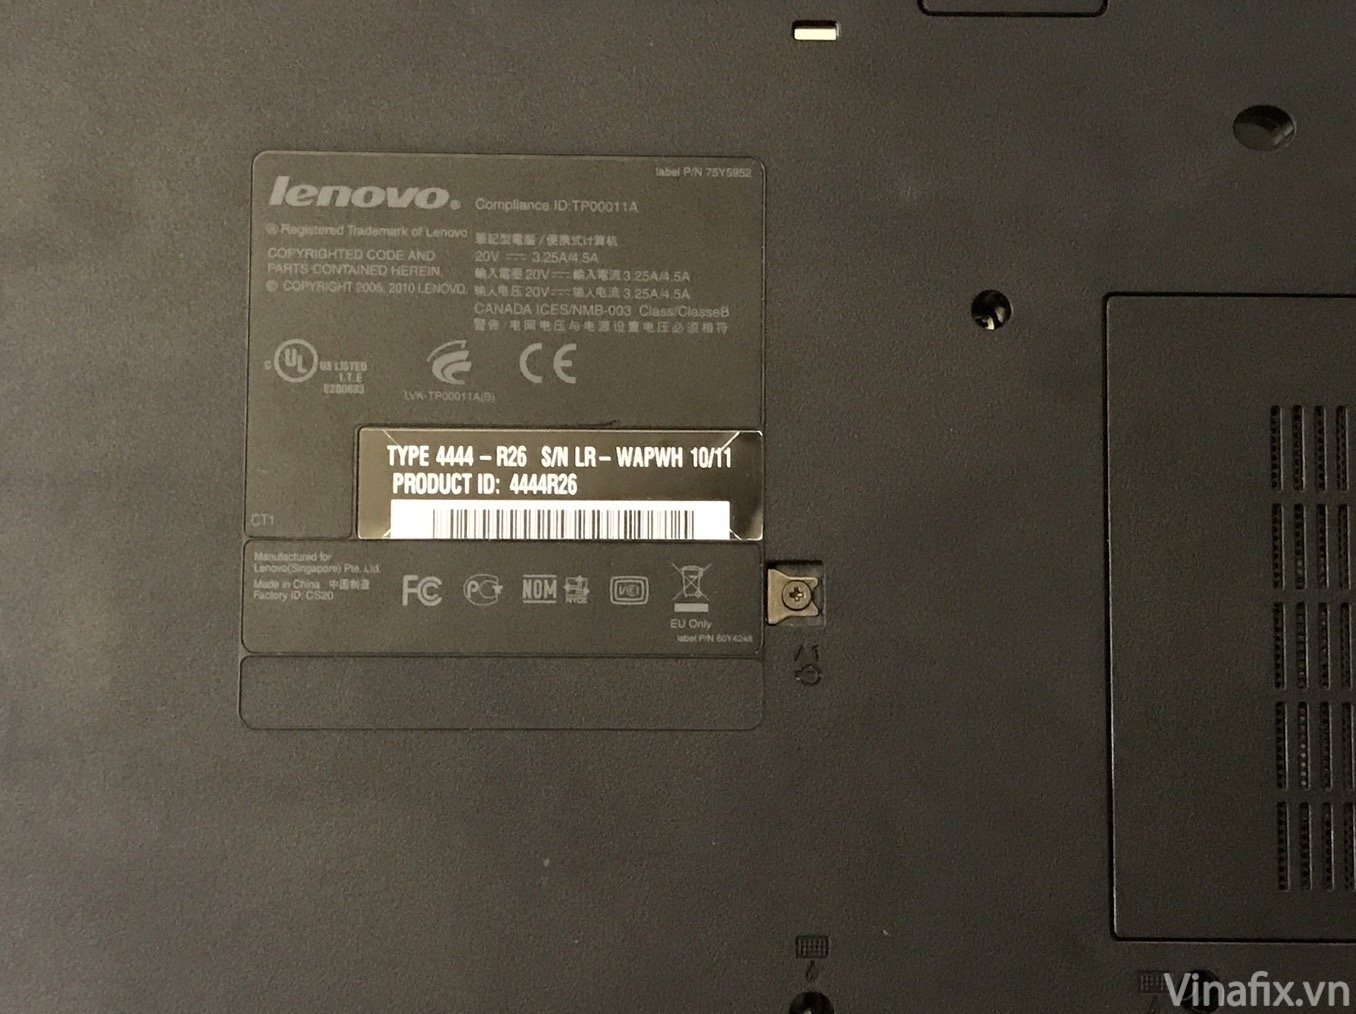 How to fix Thinkpad Serial Number and UUID 